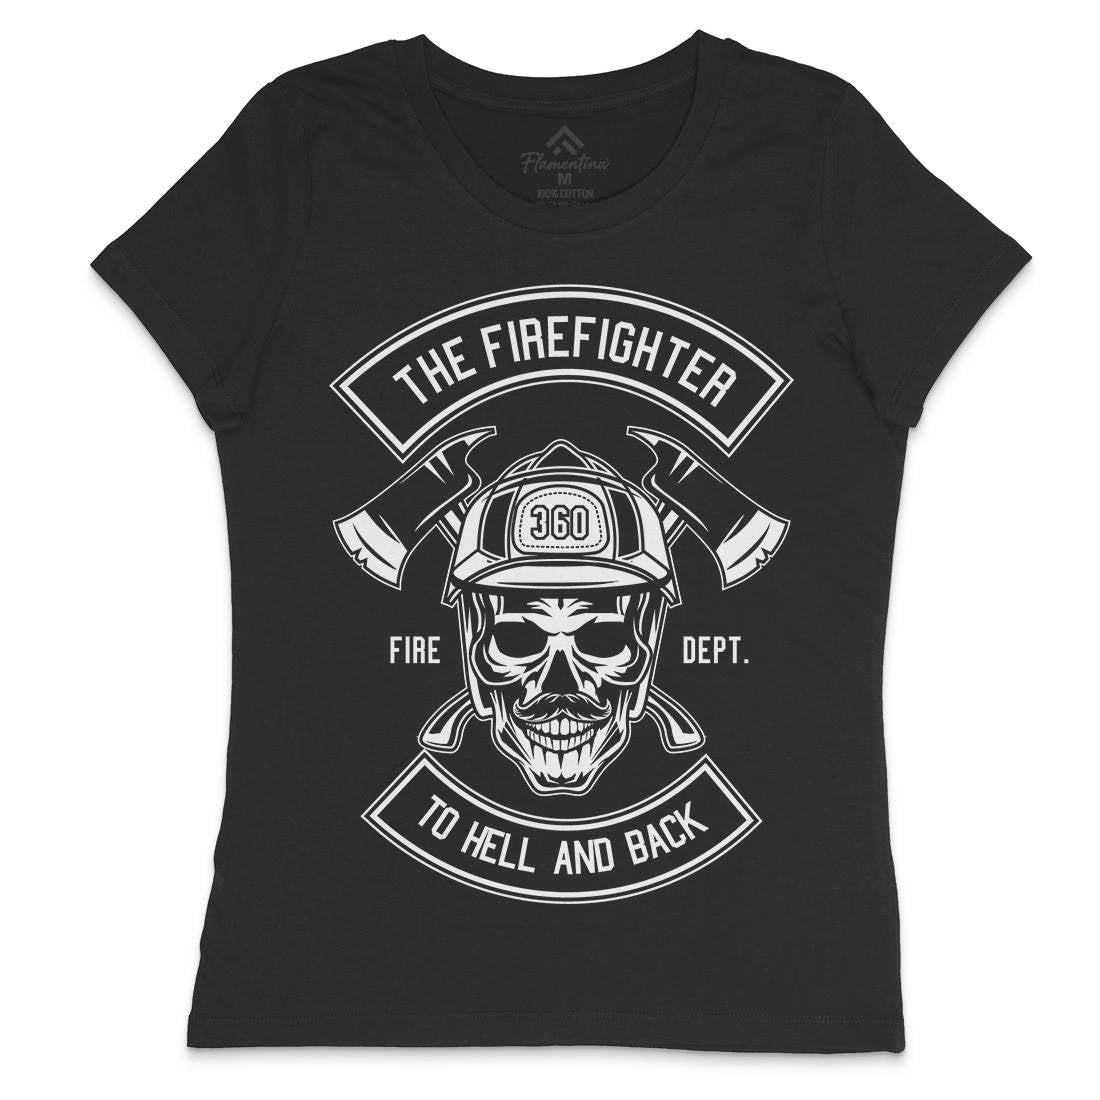 The Fire Fighter Womens Crew Neck T-Shirt Firefighters B651